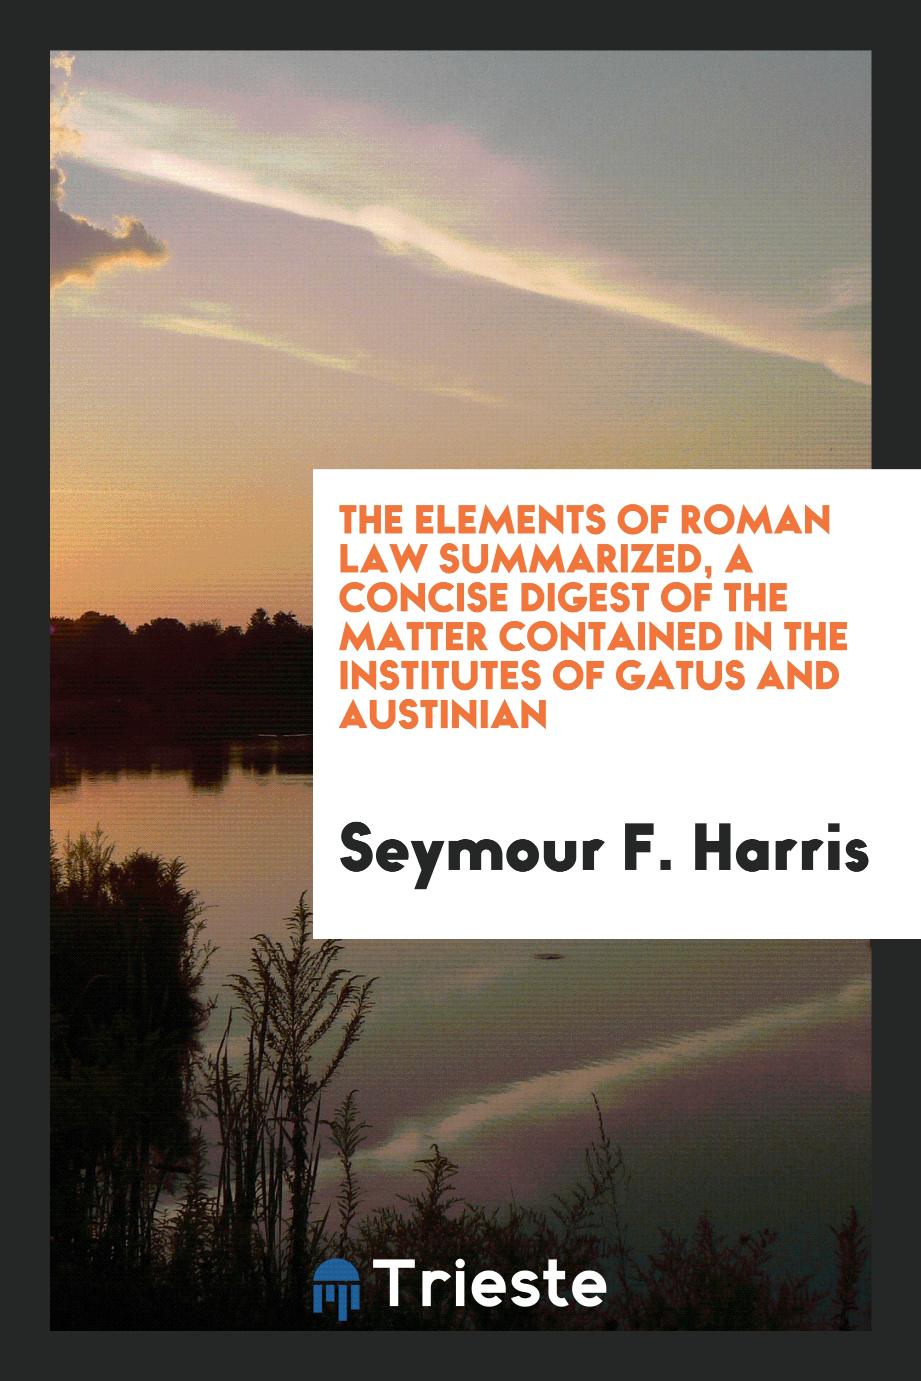 The Elements of Roman Law Summarized, a Concise Digest of the Matter Contained in the Institutes of Gatus and Austinian